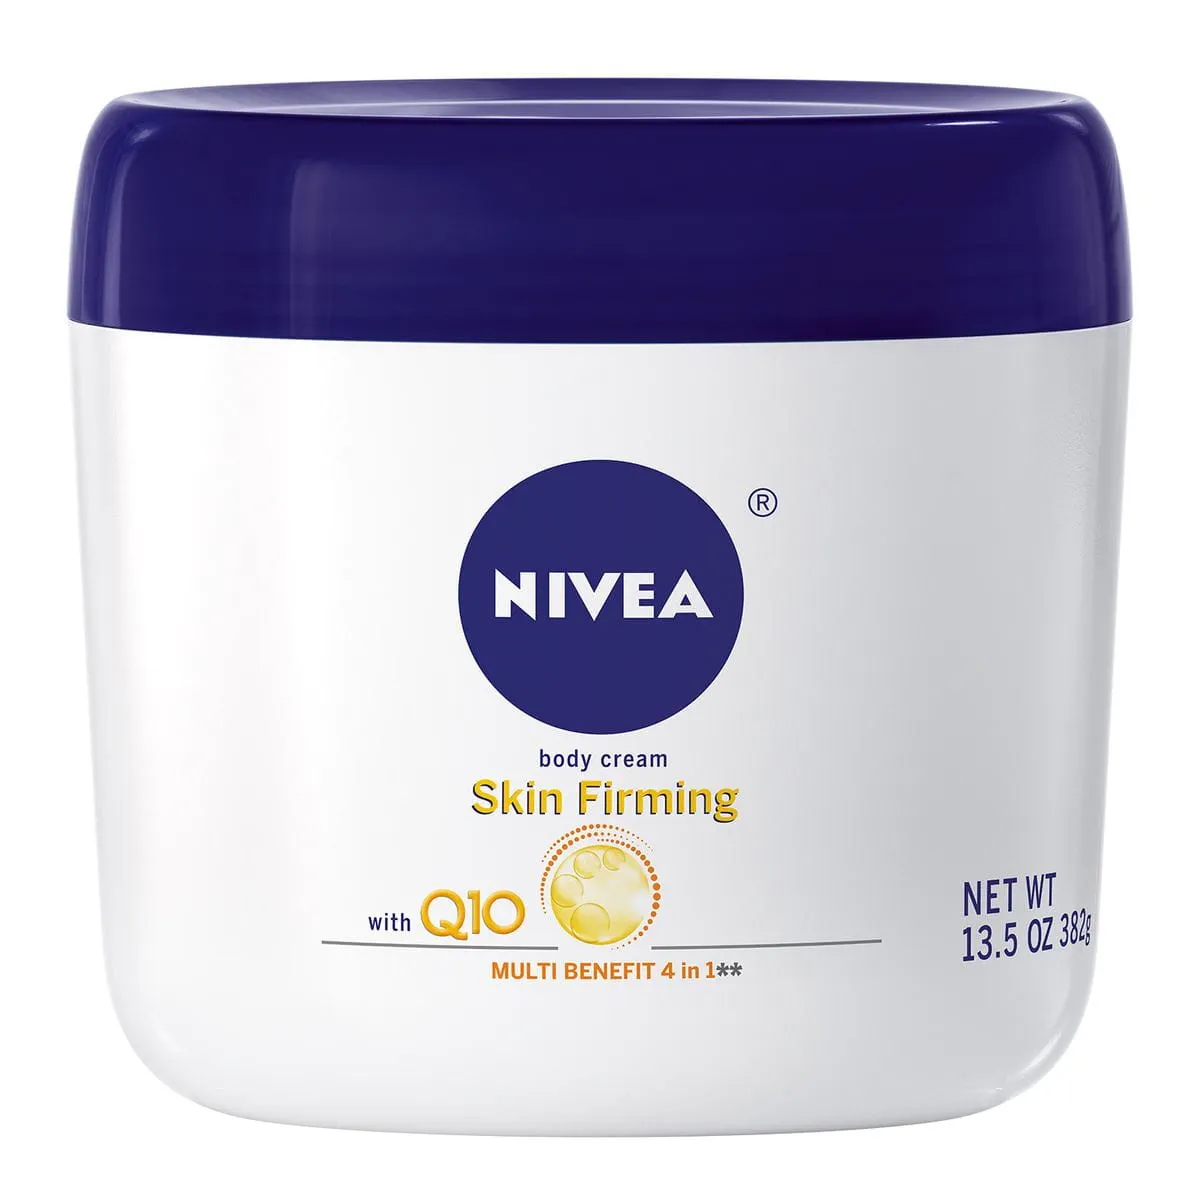 NIVEA Skin Firming Body Cream Formulated with Q10